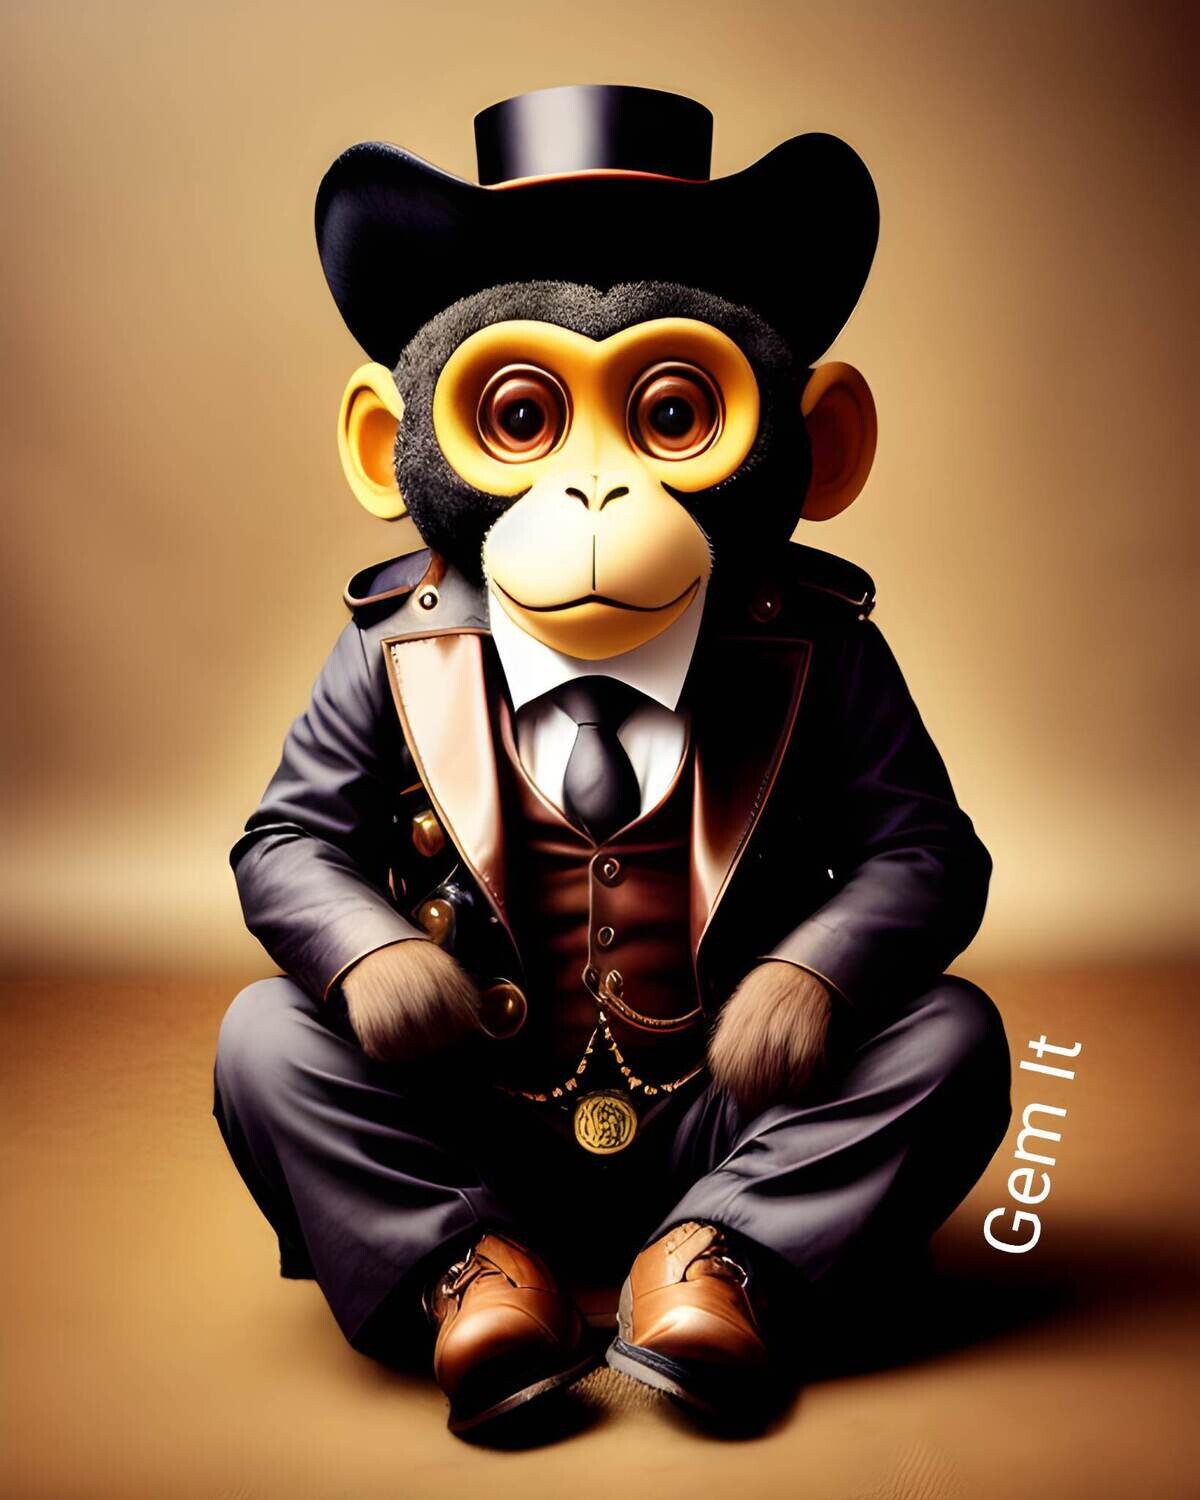 Steampunk Monkey WM - Specially ordered for you. Delivery is approximately 4 - 6 weeks.